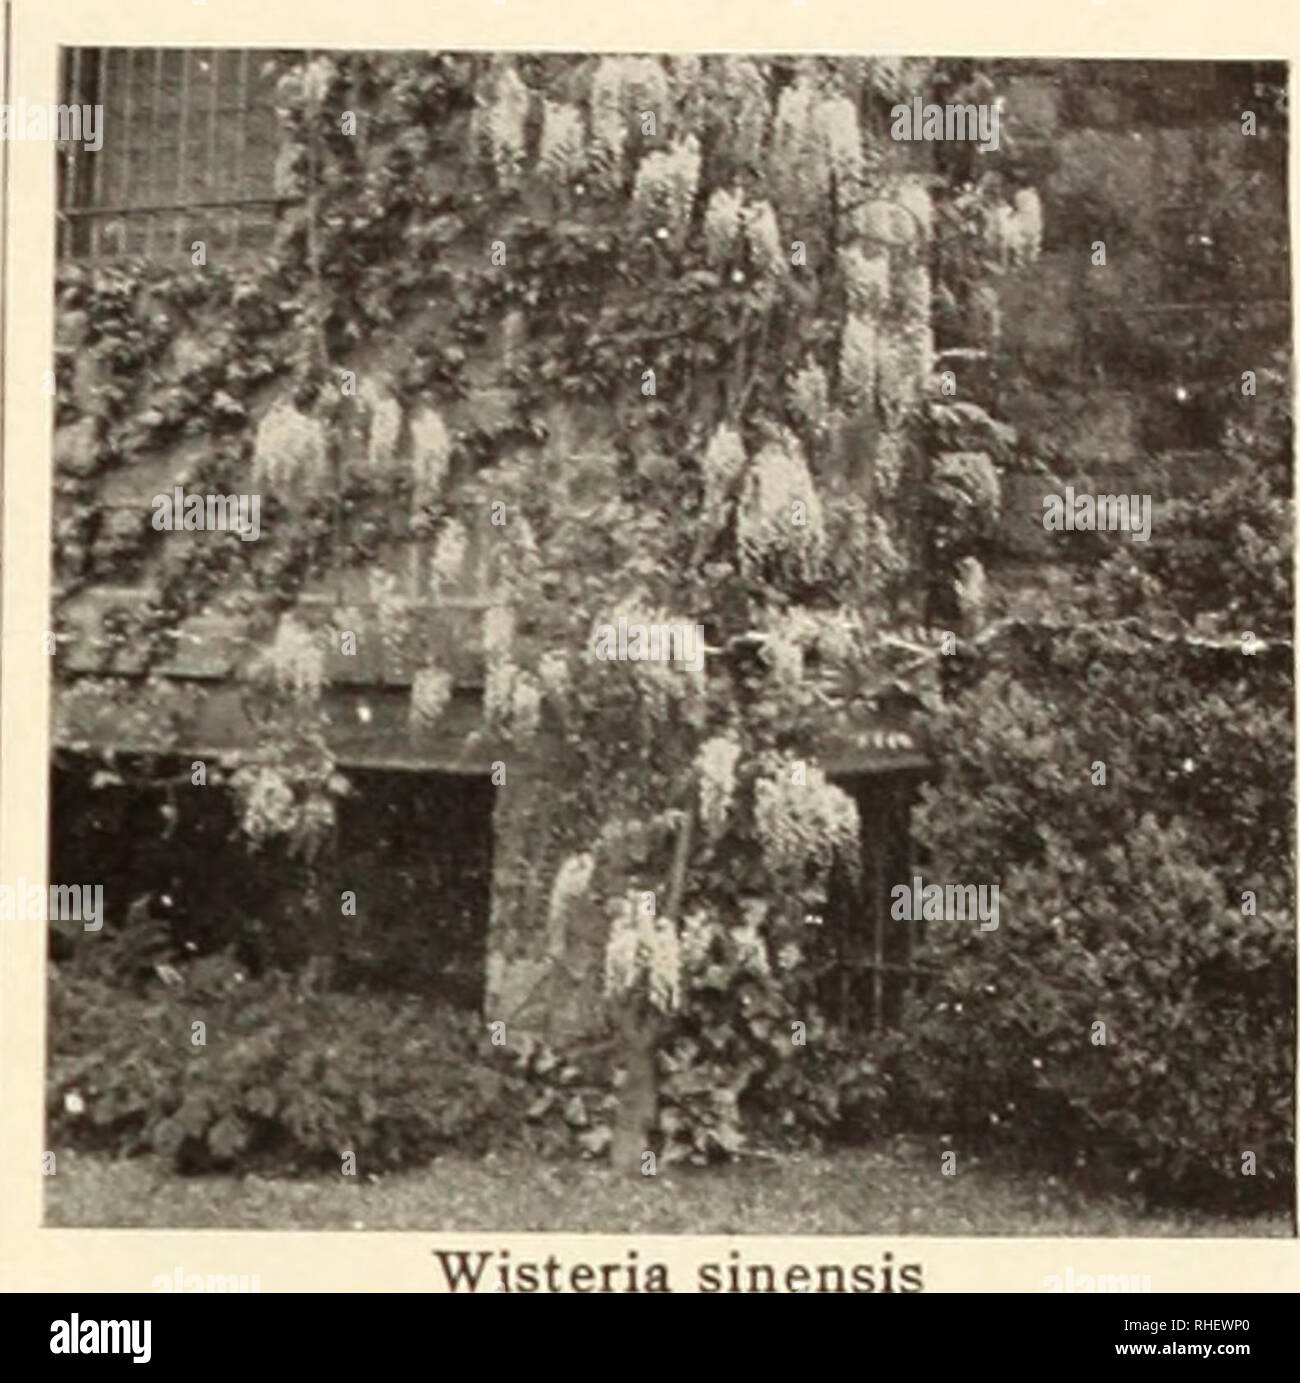 . Bolgiano's capitol city seeds : 1889 - 1950. Nurseries (Horticulture) Catalogs; Bulbs (Plants) Catalogs; Vegetables Catalogs; Garden tools Catalogs; Seeds Catalogs. Rudbeckia (Coneflower) Tall-growing plants bearing large daisies with cone-like centers. They are easy to grow in full sun in ordinary soil. Purpurea, The King. A crimson-red form that can be cornhined effectively with White Lustre. 3 for 51.65. White Lustre. A new Coneflower with pure white petals and a bronzv gold cone. Starts to bloom in June and continues all summer. Stiff, sturdy stems. 3 ft. 3 for $1.65. Spiraea (Astilbe) F Stock Photo